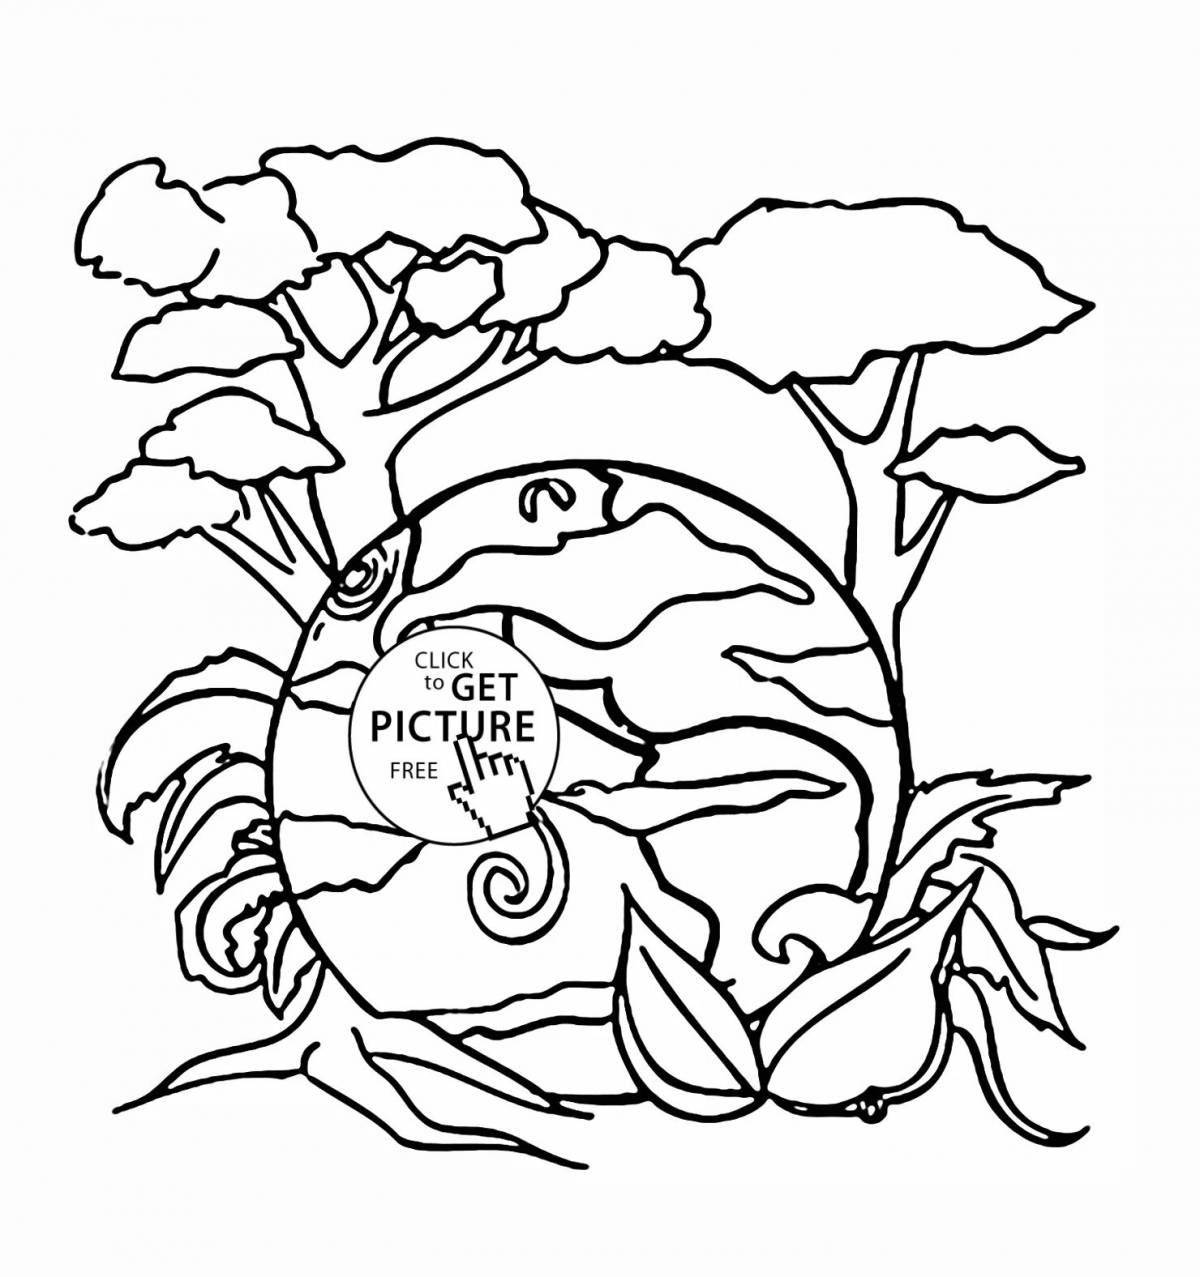 Exciting ecological coloring book